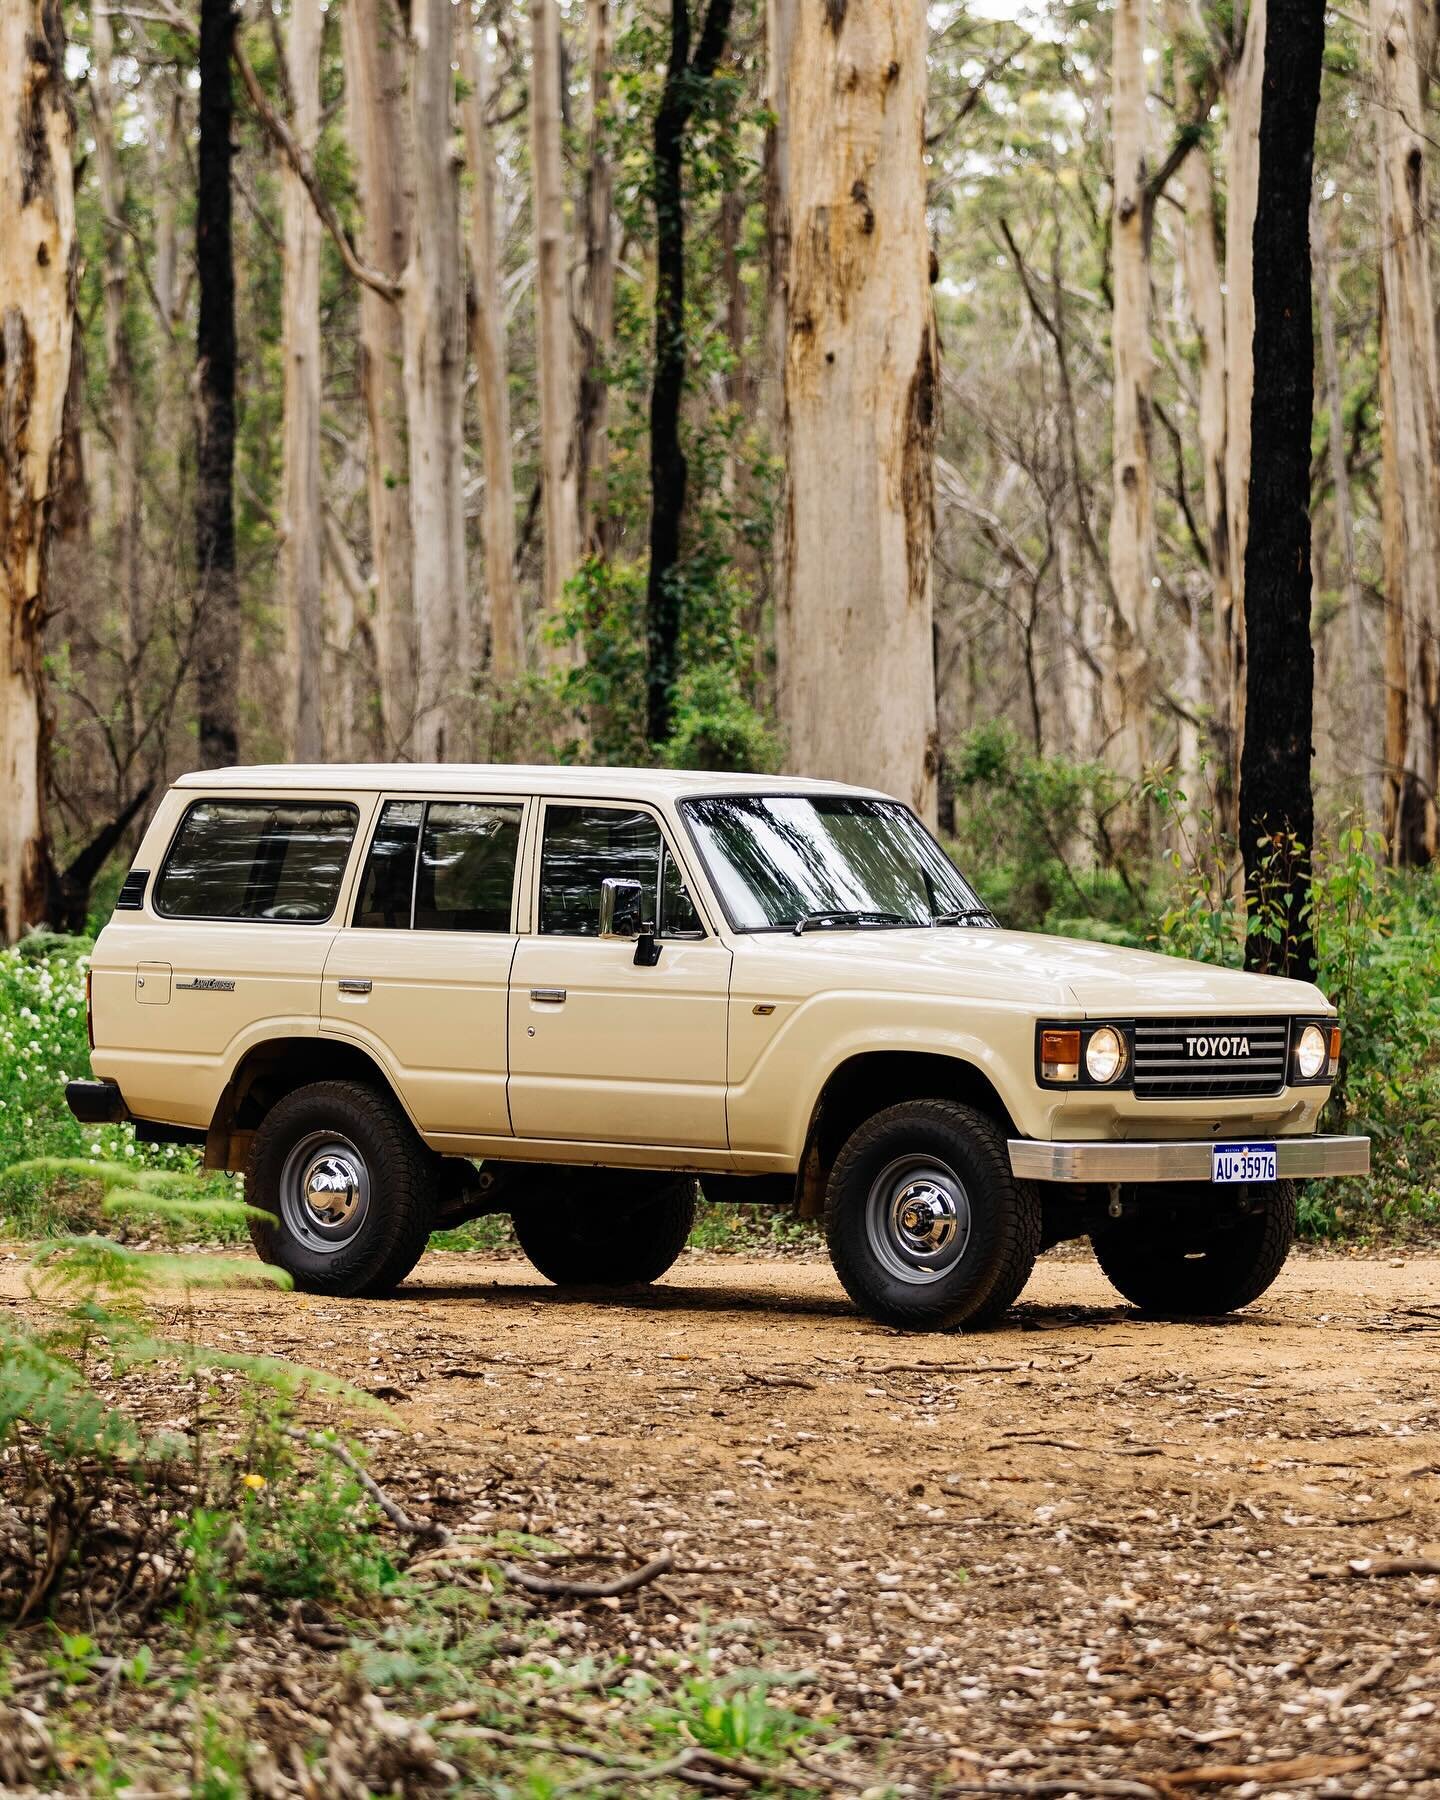 Sundays with Salina&rsquo;s &lsquo;84 60 Series. Brew up and jump over to the website to check it out. 📸 @joelseeto 

#toyota #toyotalandcruiser #4wd #overland #4x4 #classiccars #classic #classic4wd #landcruiser #60series